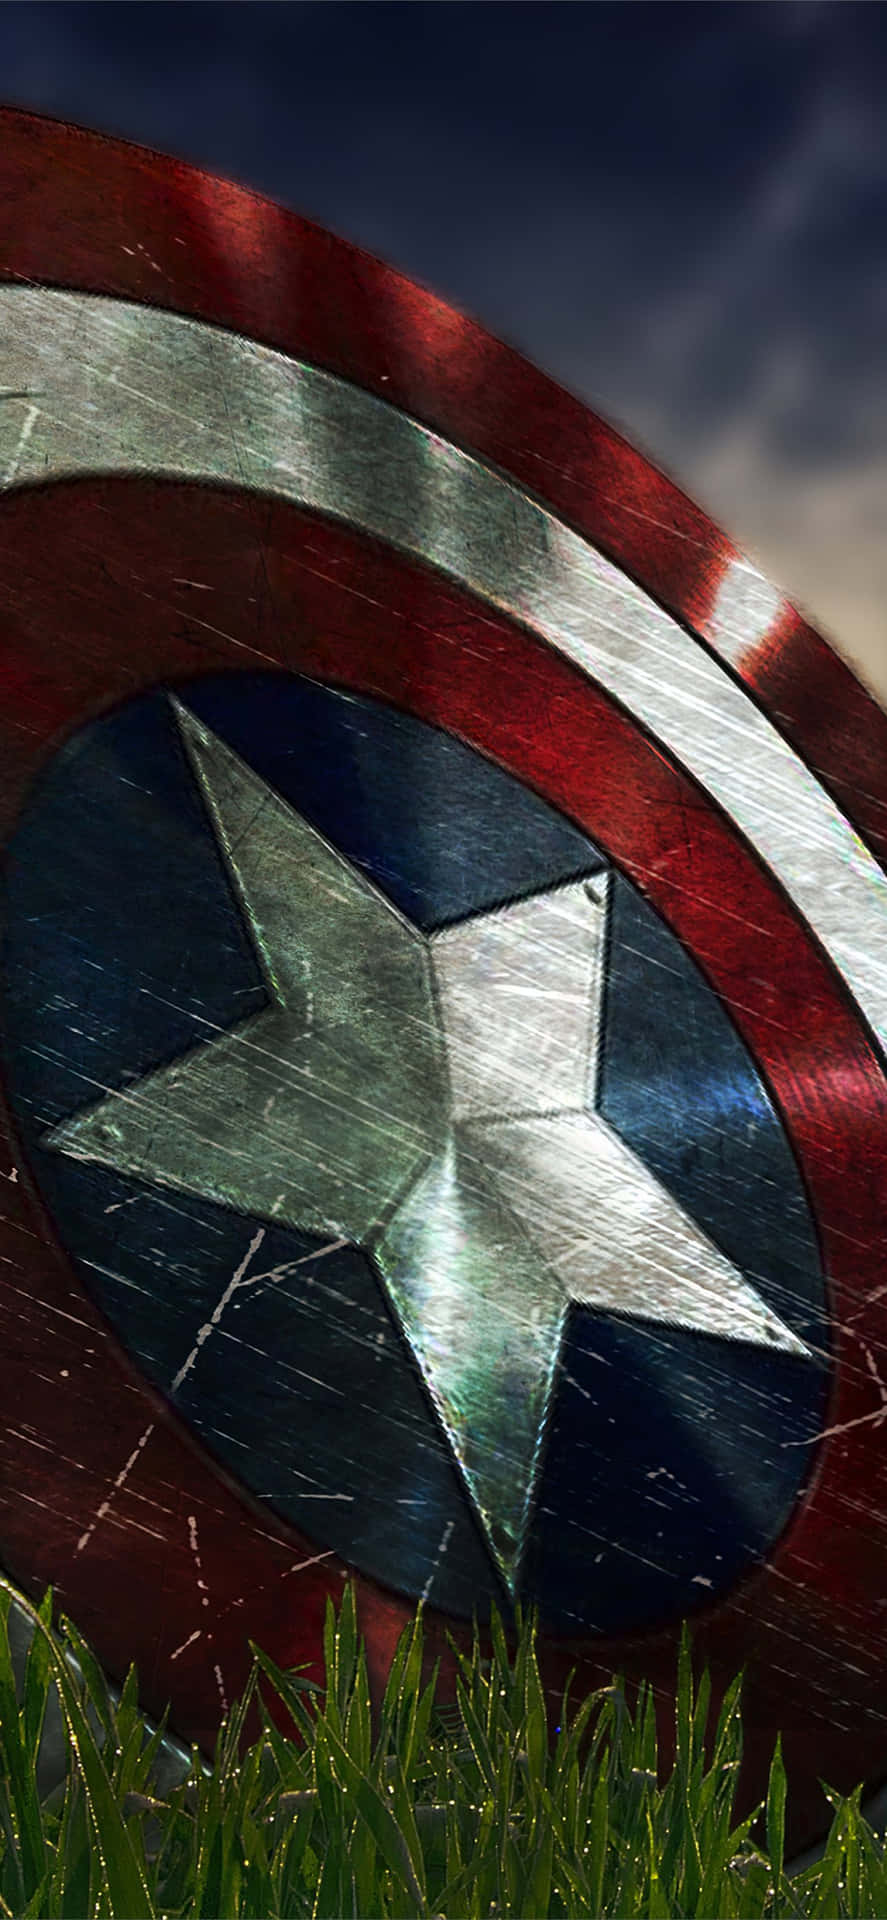 Captain America – the Marvel Superhero comes to Android